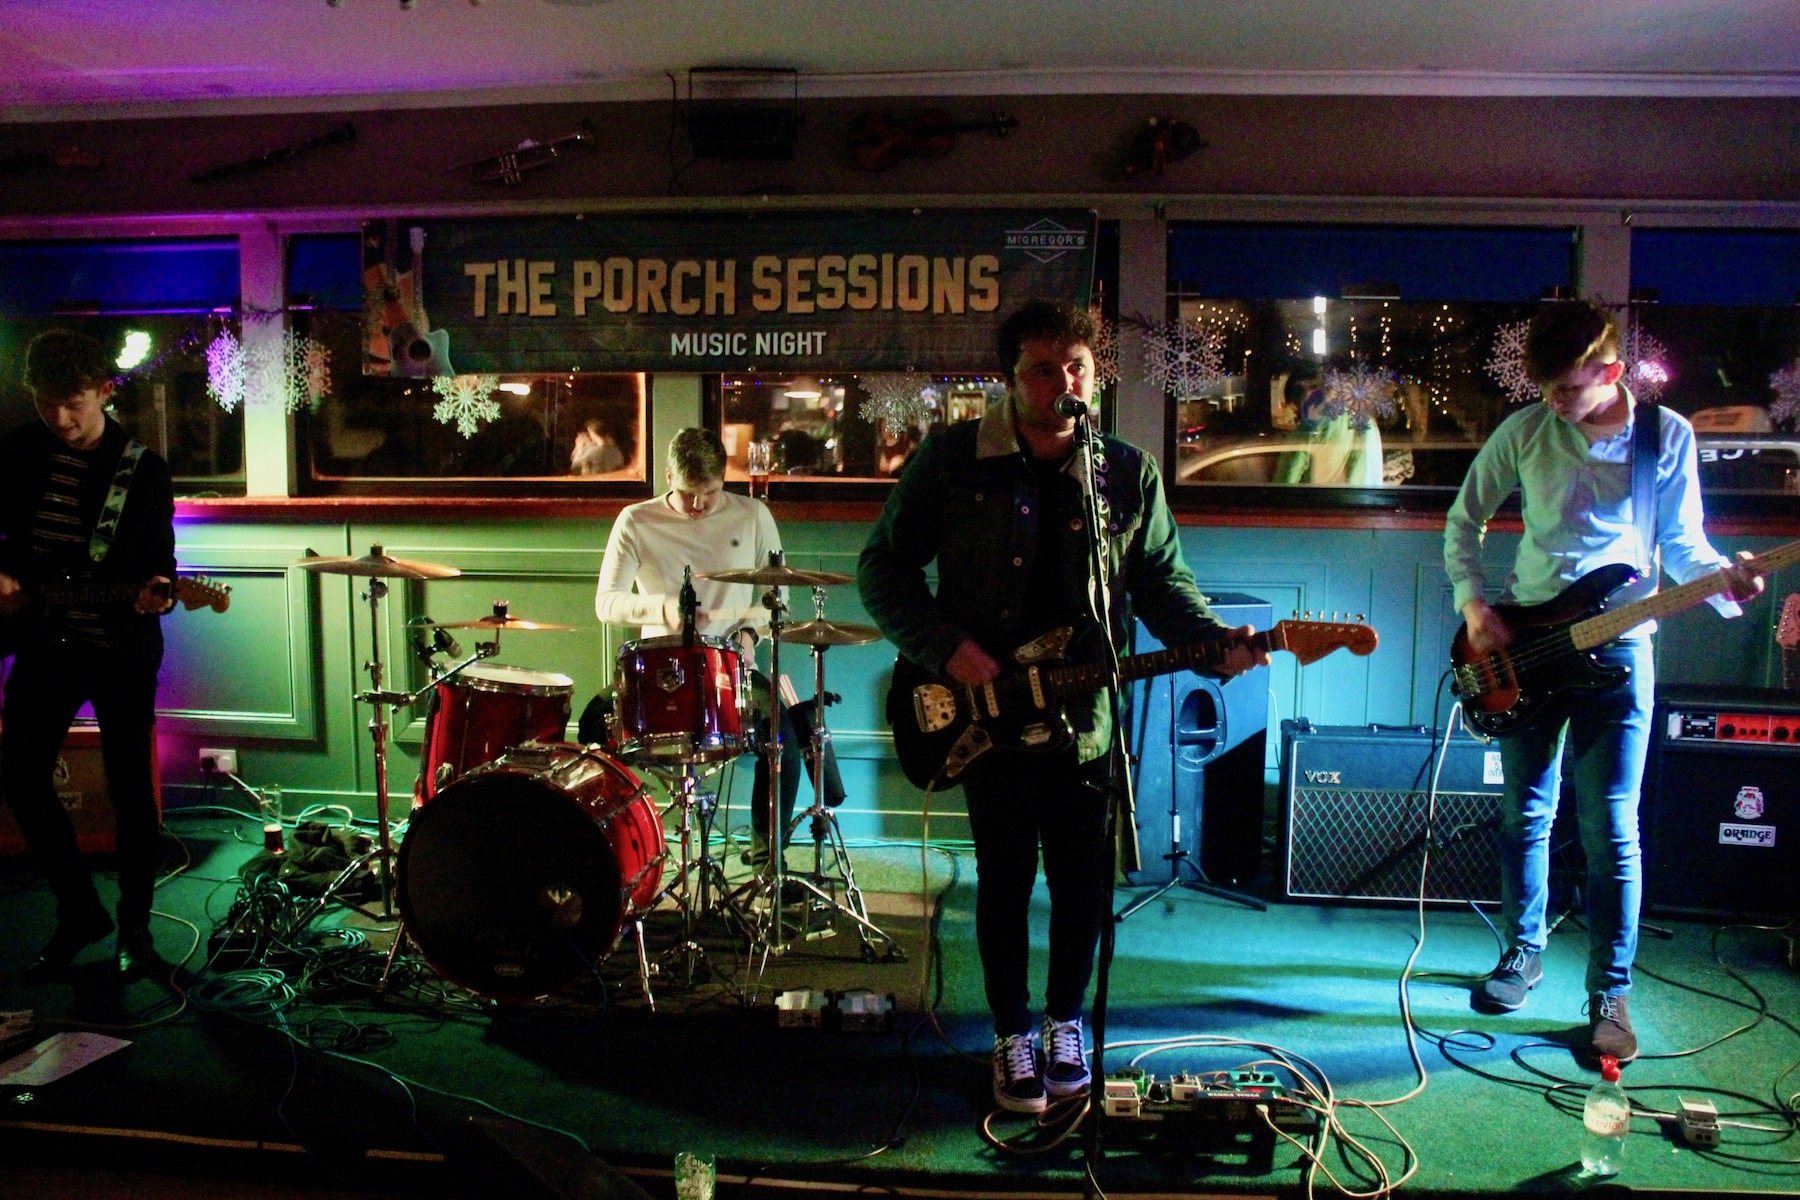 Park Circus at The Porch Sessions Inverness December 20183119 - The Porch Sessions, 8/12/2018 - Images